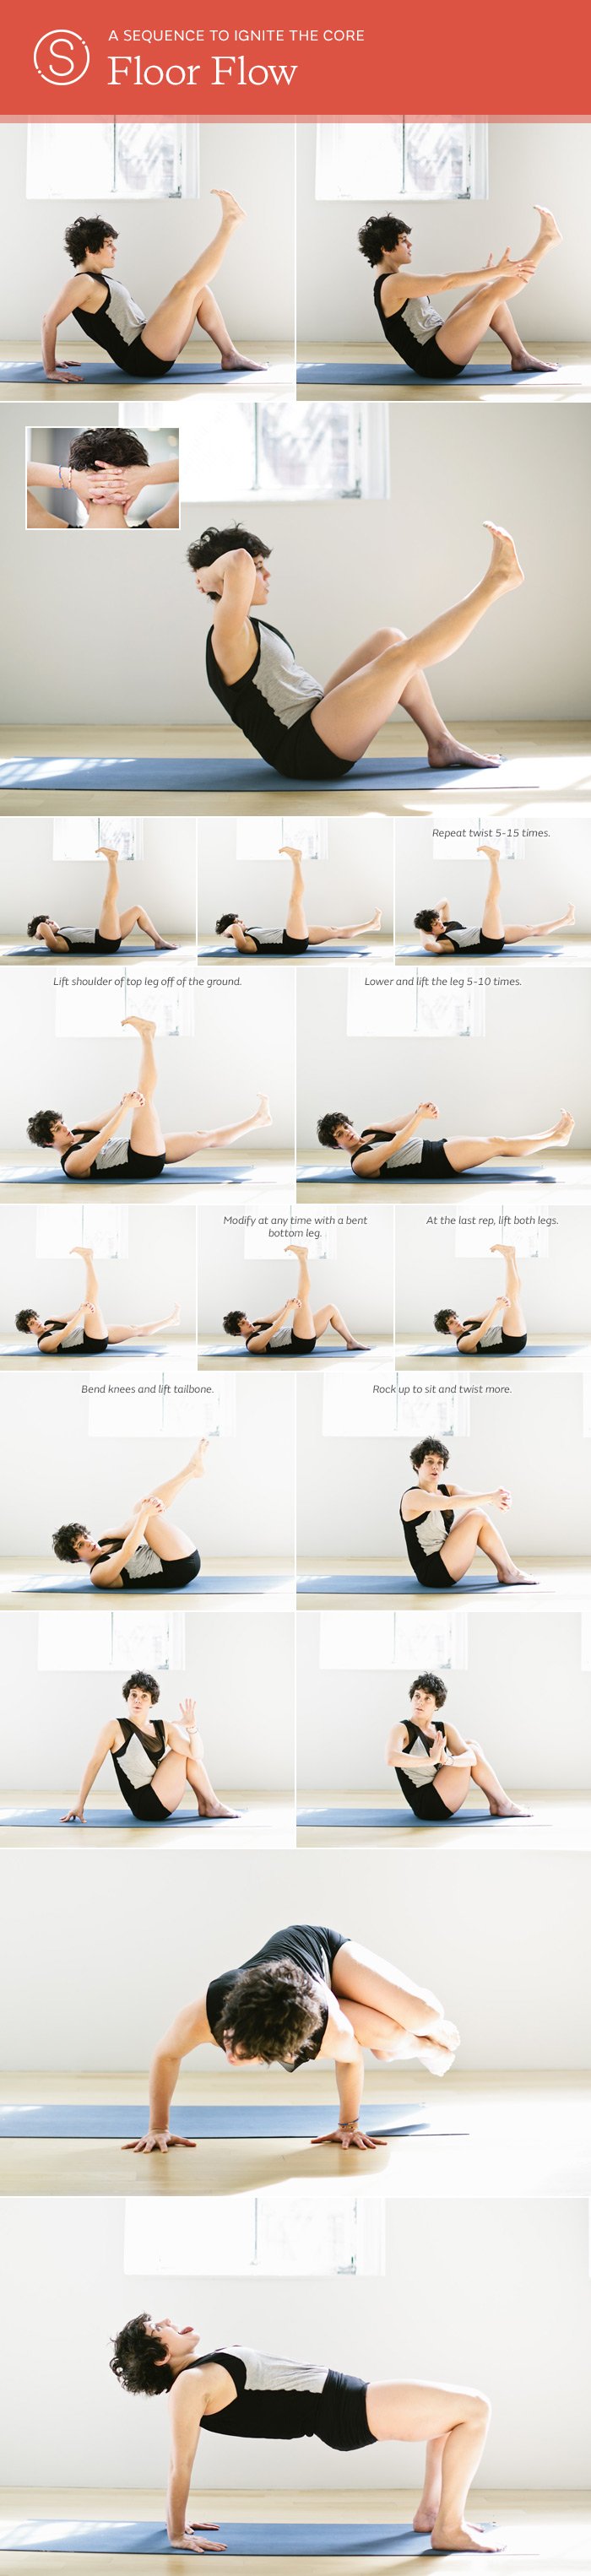 A Yoga Sequence to Develop Inner Strength - Sonima